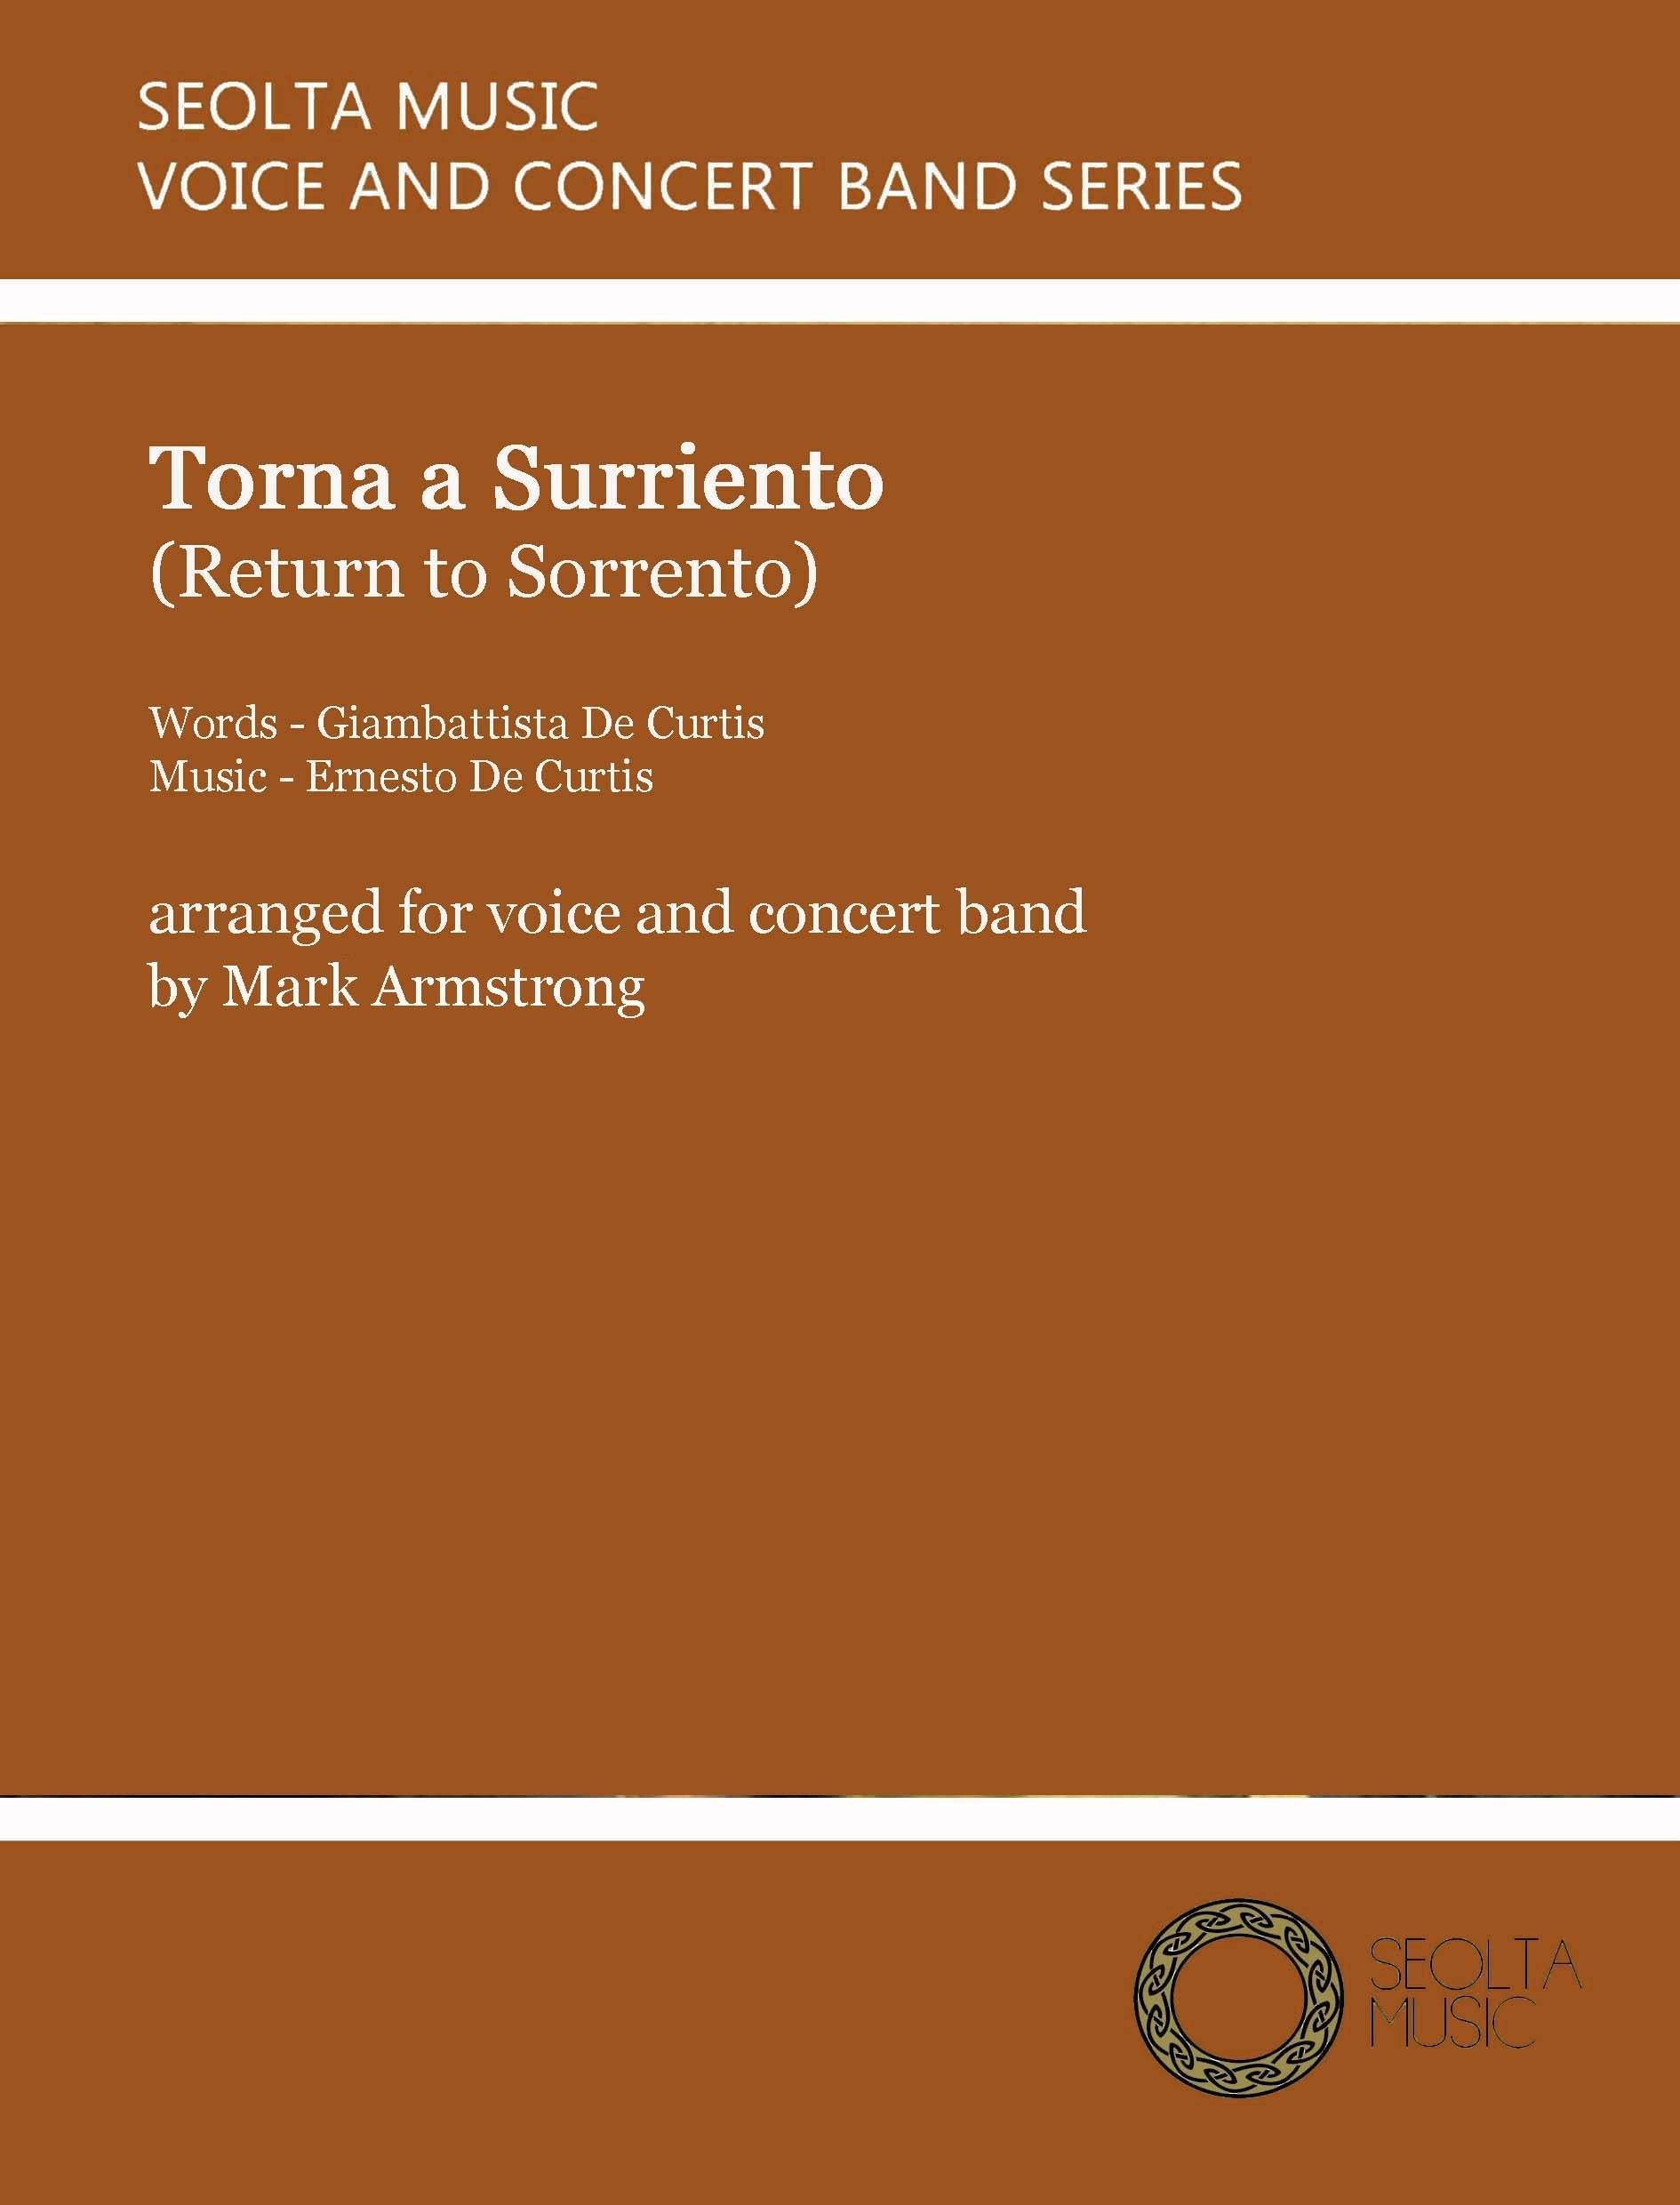 return-to-sorrento-torna-a-surriento-voice-band-sheet-music